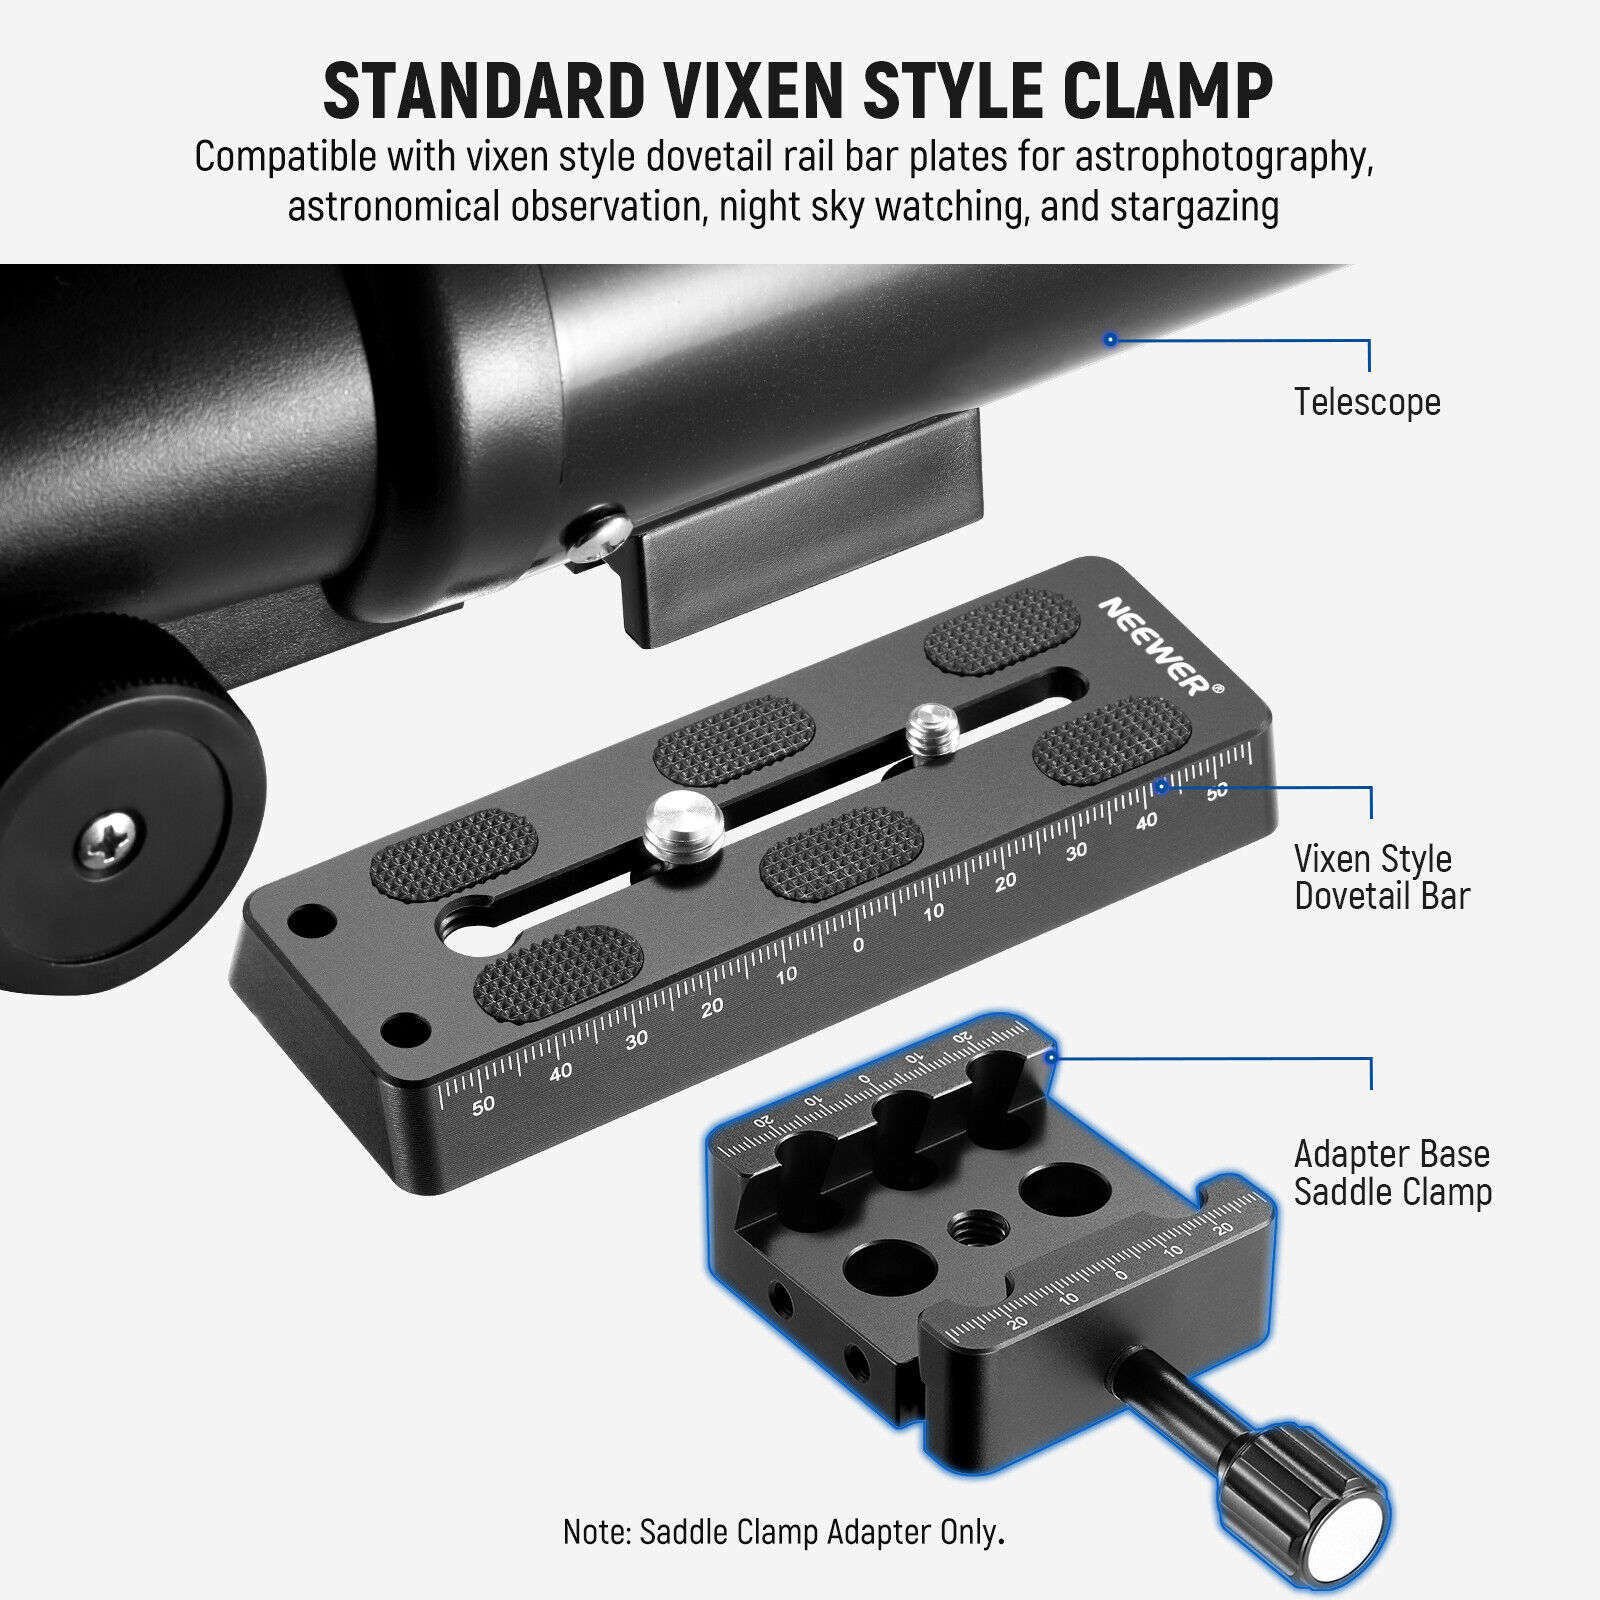 NEEWER Telescope Tripod Adapter Base Saddle Clamp for Vixen Style Dovetail Bars - $70.29